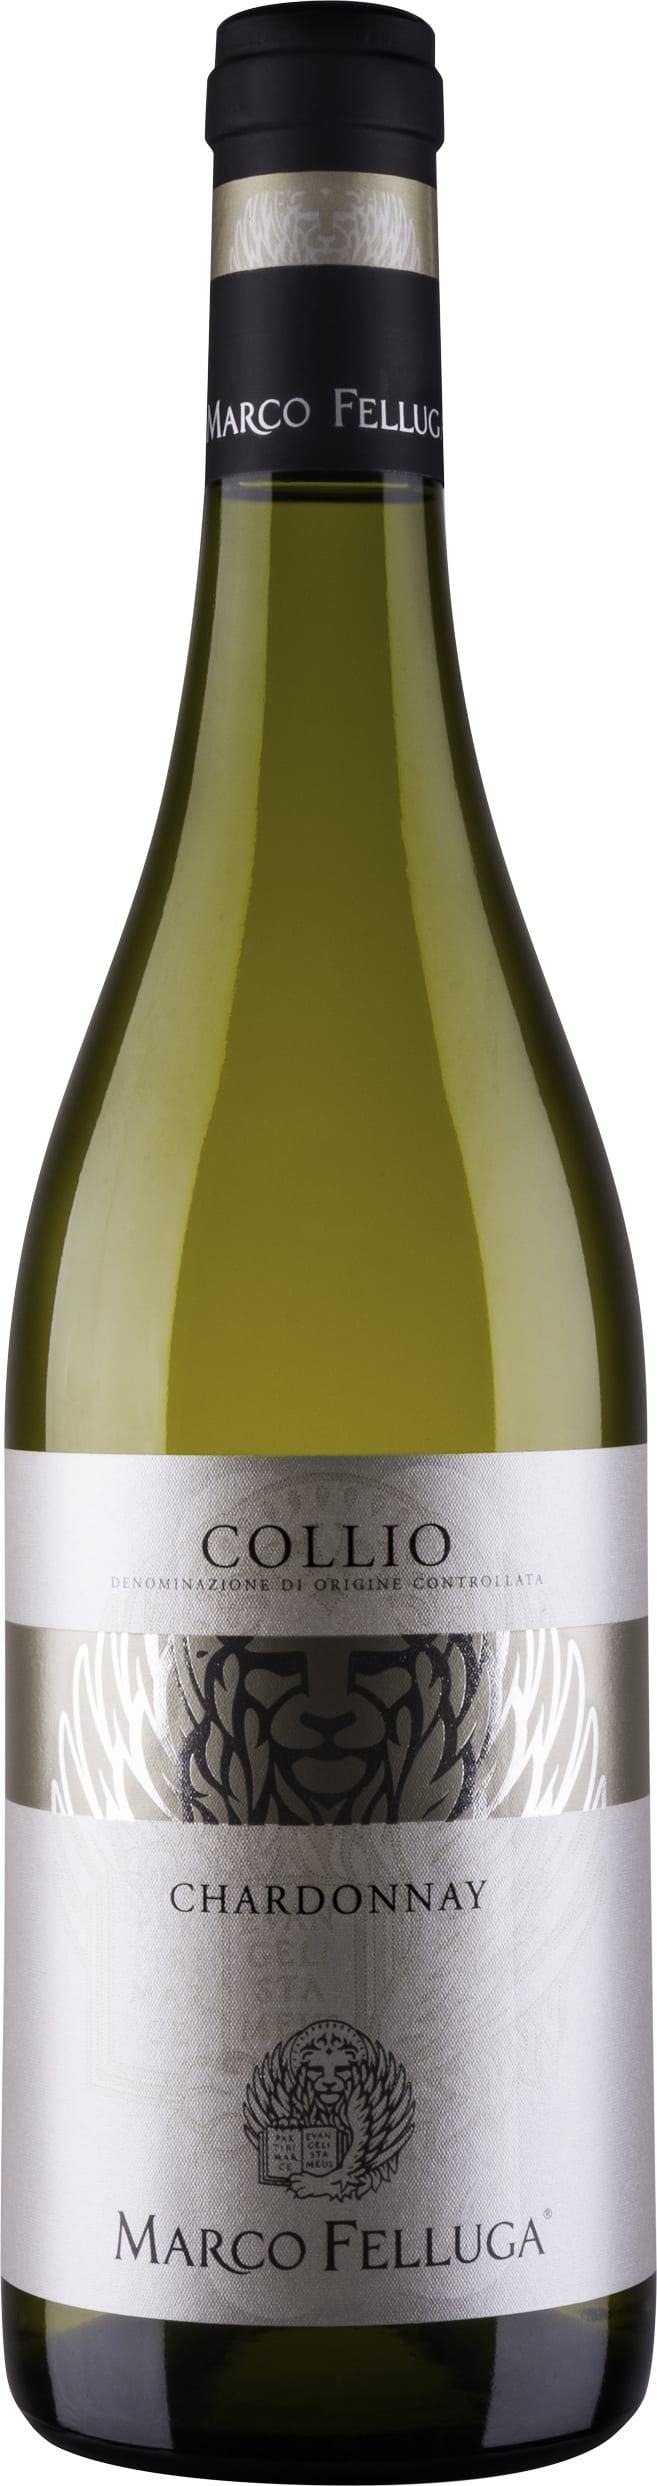 Marco Felluga Collio Chardonnay 2022 75cl - Buy Marco Felluga Wines from GREAT WINES DIRECT wine shop